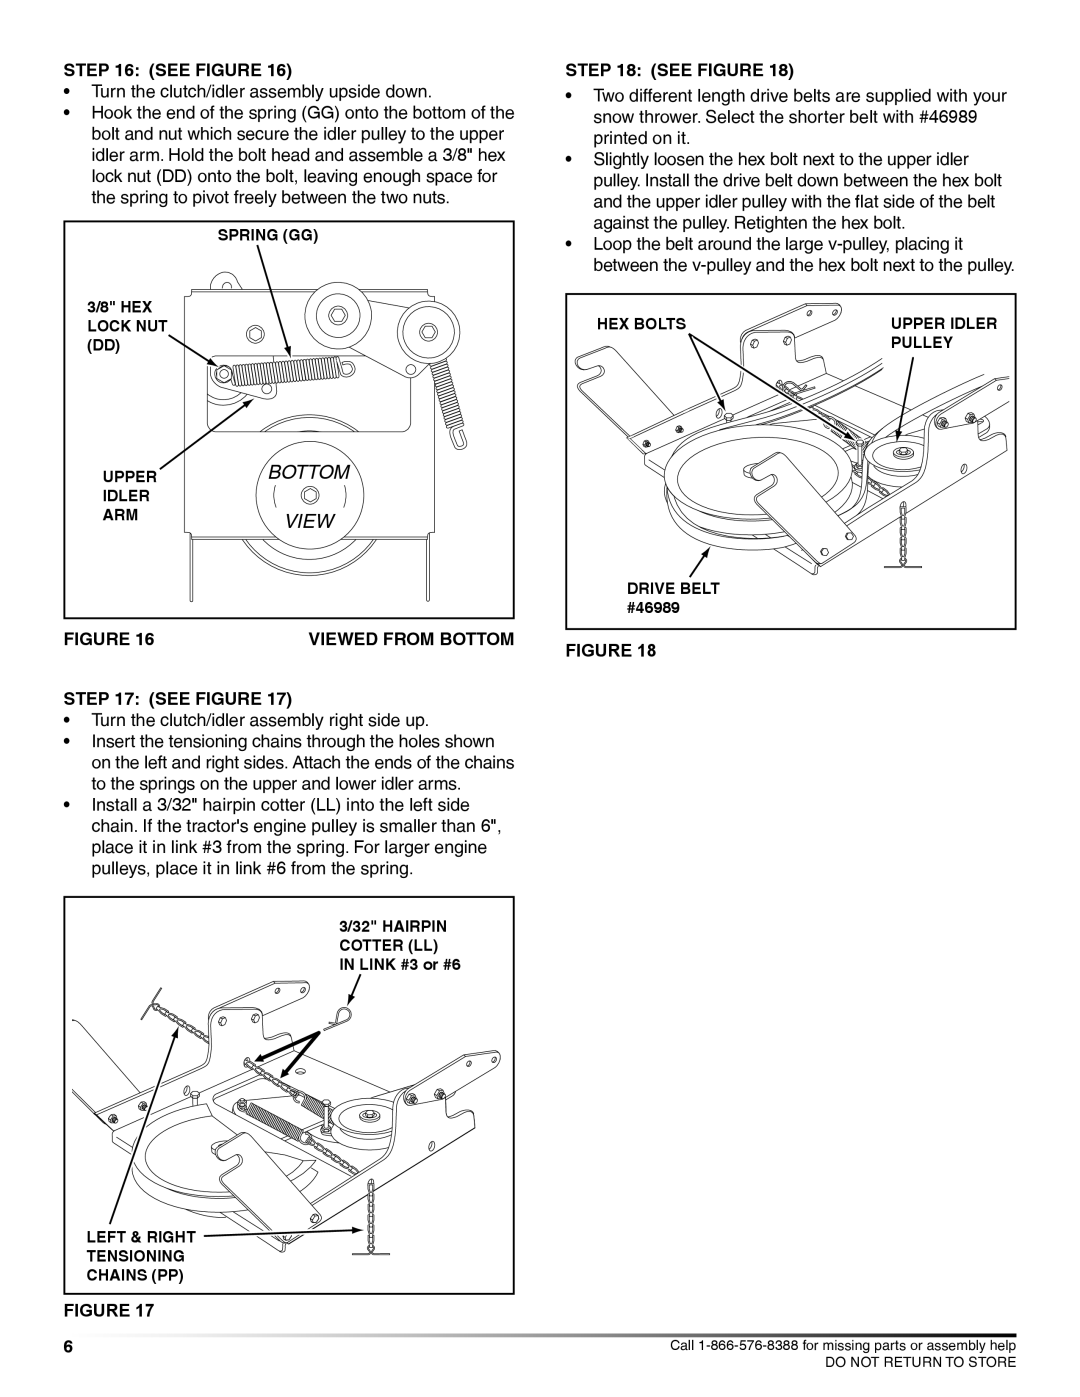 Craftsman 71-24831 instruction manual See Figure, Viewed From Bottom 